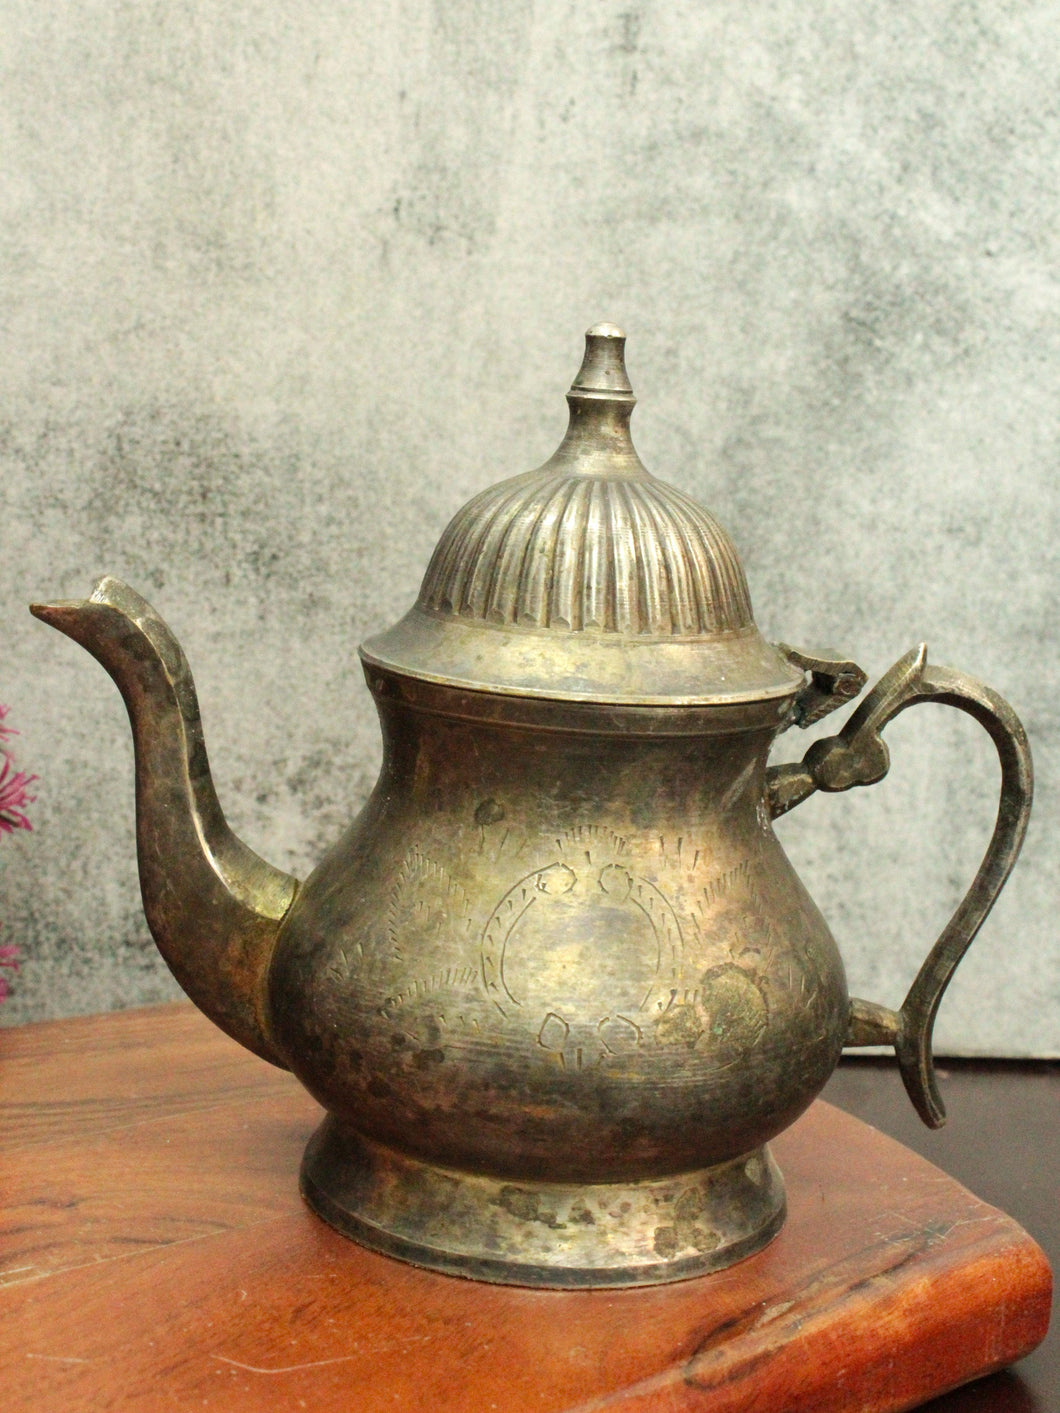 Elegant Brass Tea Pot: Timeless Beauty for Your Tea Rituals - Style It by Hanika